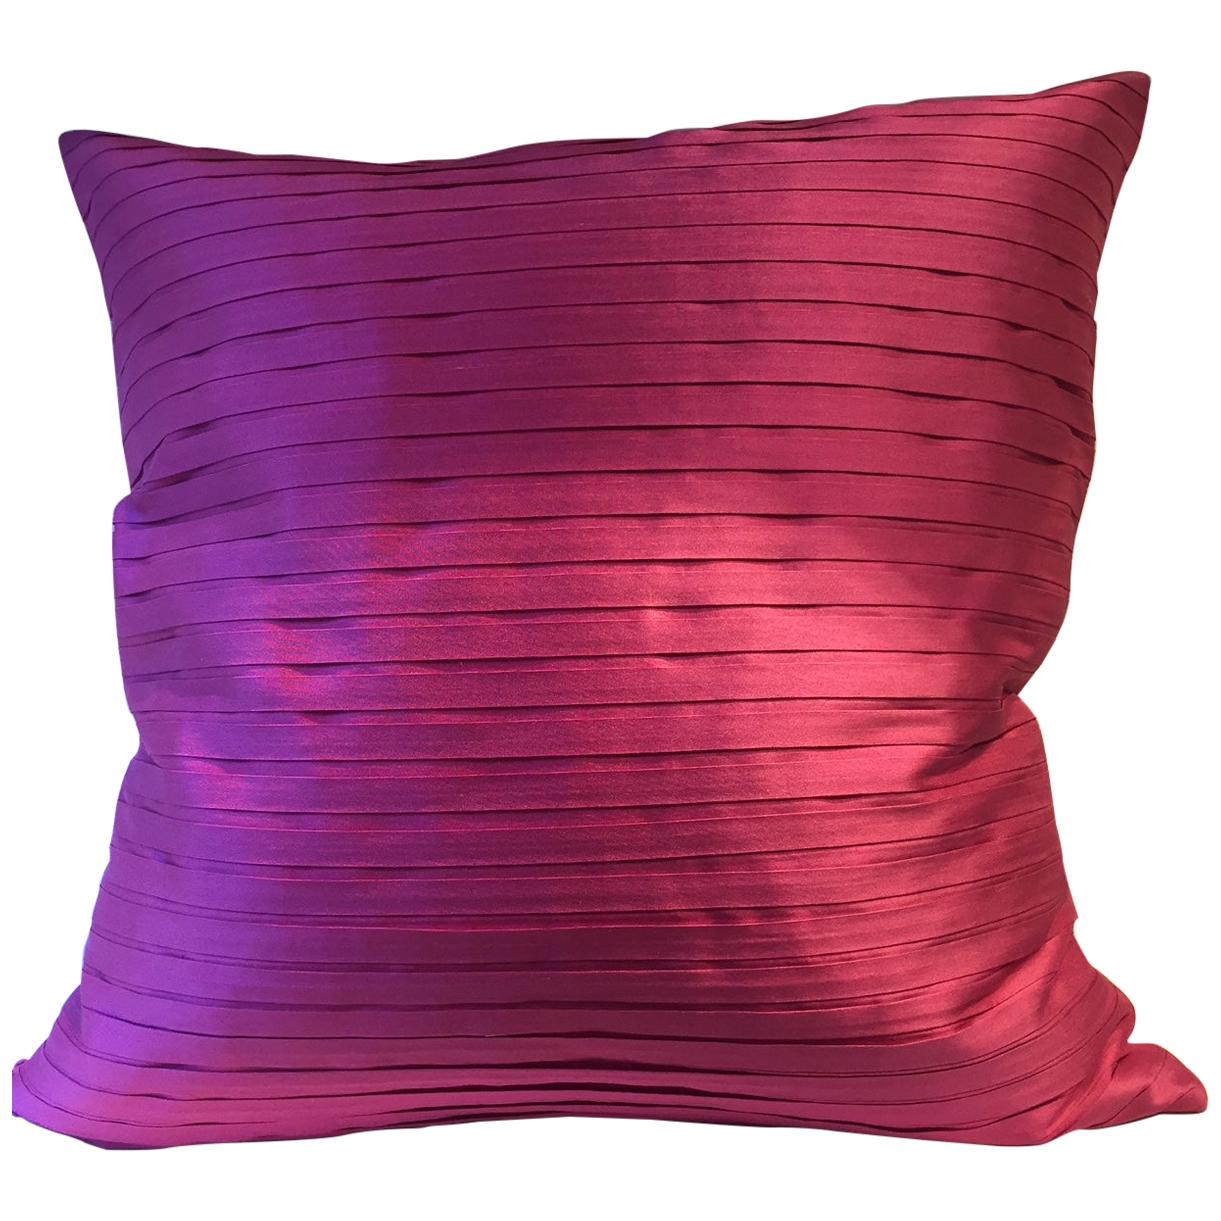 Pleated Silk Cushion Box Pleat Pattern Color Lipstick Pink For Sale